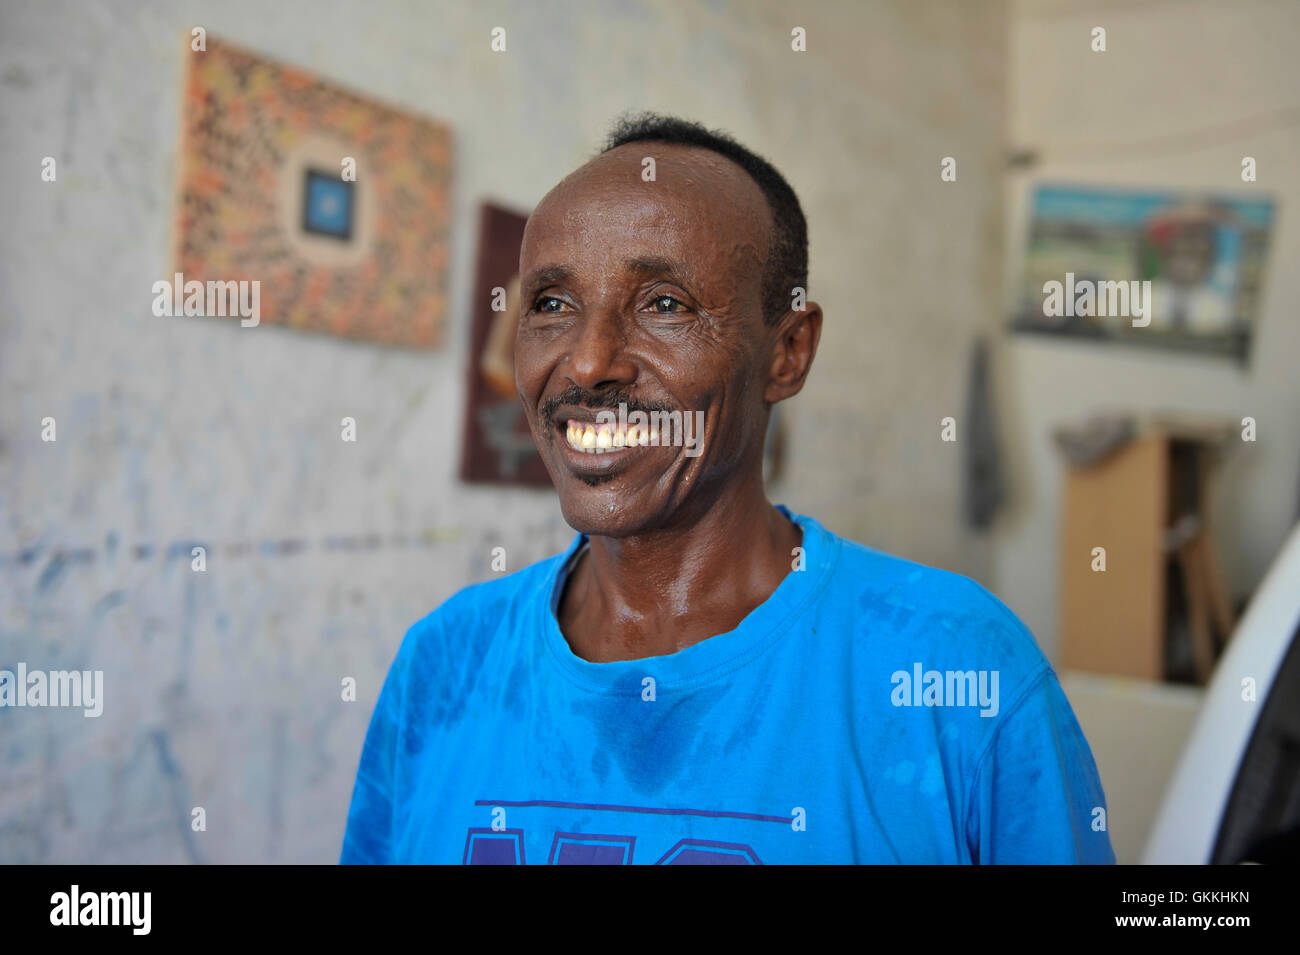 A Somali artist, Adan Farah Afey, works at the Centre for Research and Dialogue (CRD) art studio in the Wadajir District of the Somali capital Mogadishu on April 26, 2015. Many Somali artists are now able to practice their art, educating the masses on social issues, promoting peace and advocating for good governance and unity, among other issues.  Mogadishu and most parts areas of Somalia are now enjoying the longest period of peace in years after sustained military operations by the Somali National Army (SNA) backed by African Union Mission in Somalia (AMISOM) forced Al shabab to retreat from Stock Photo